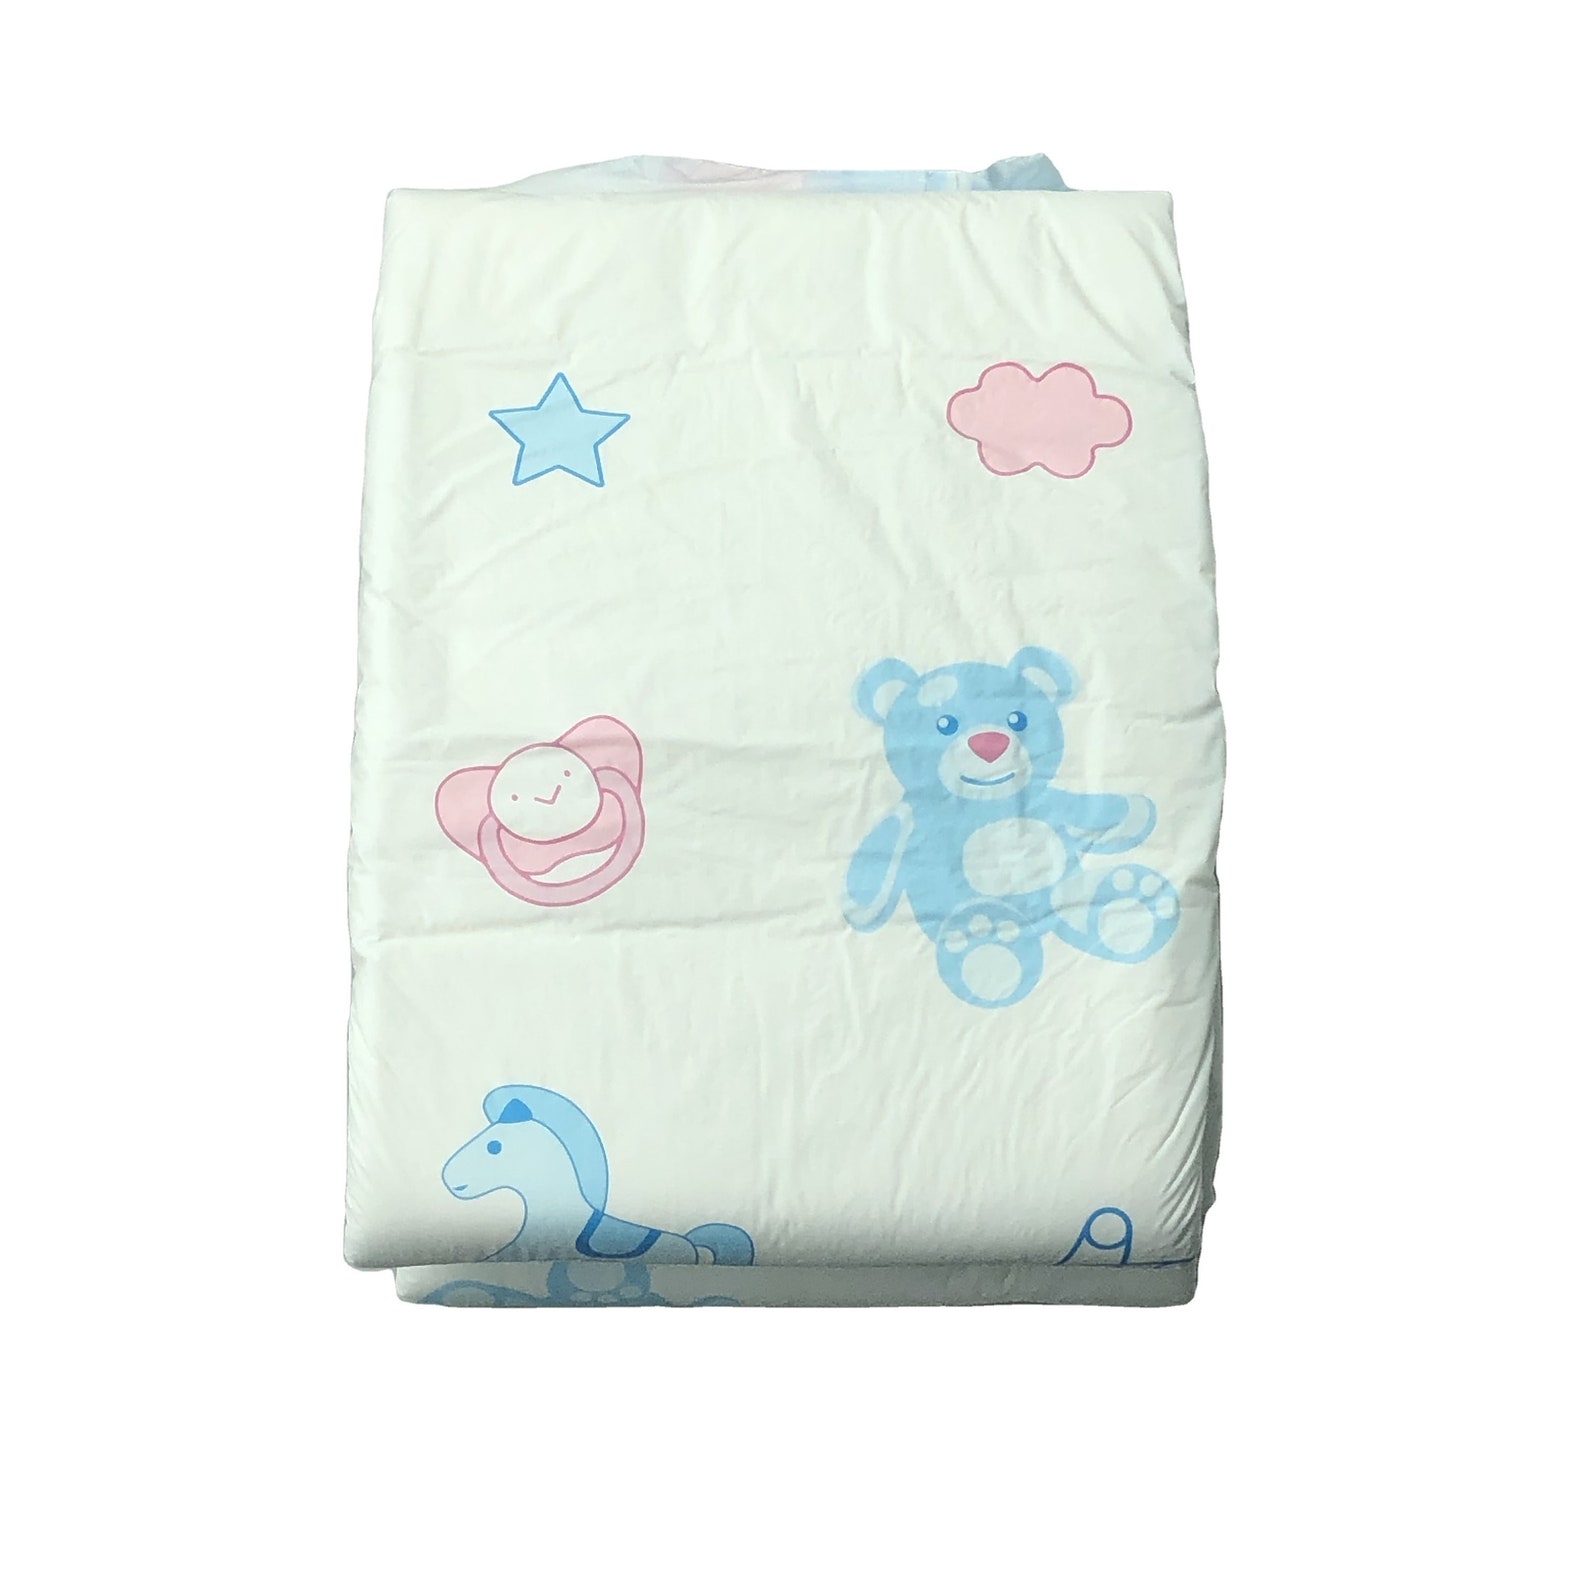 Adult Printed Diapers Cloudry Toys Large 3650 Etsy